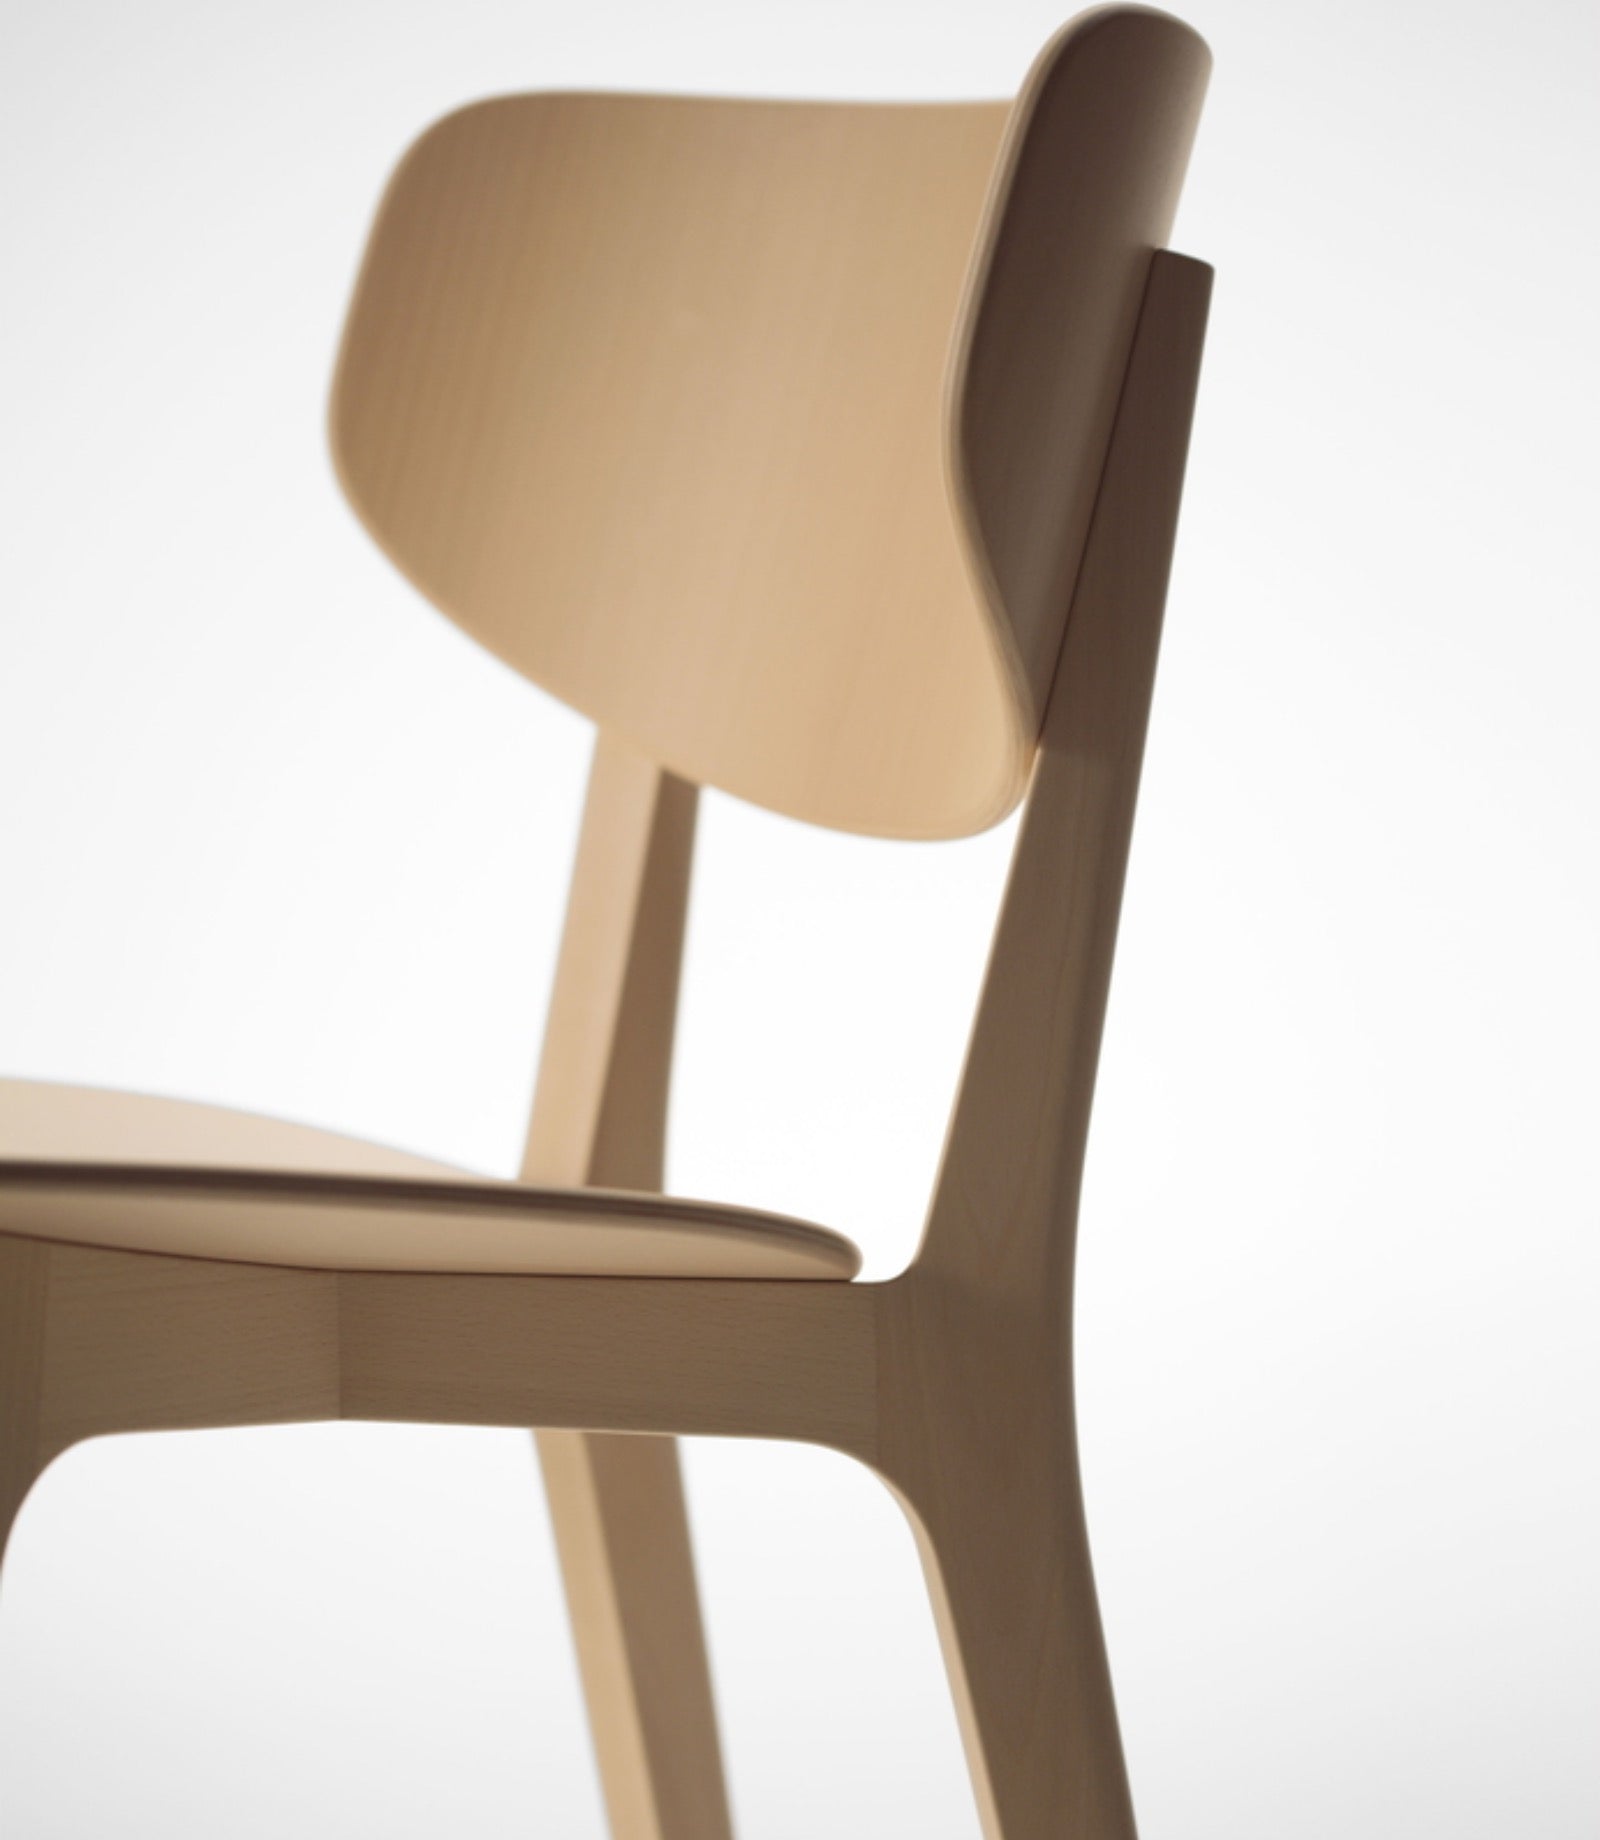 Roundish Chair Wooden Seat